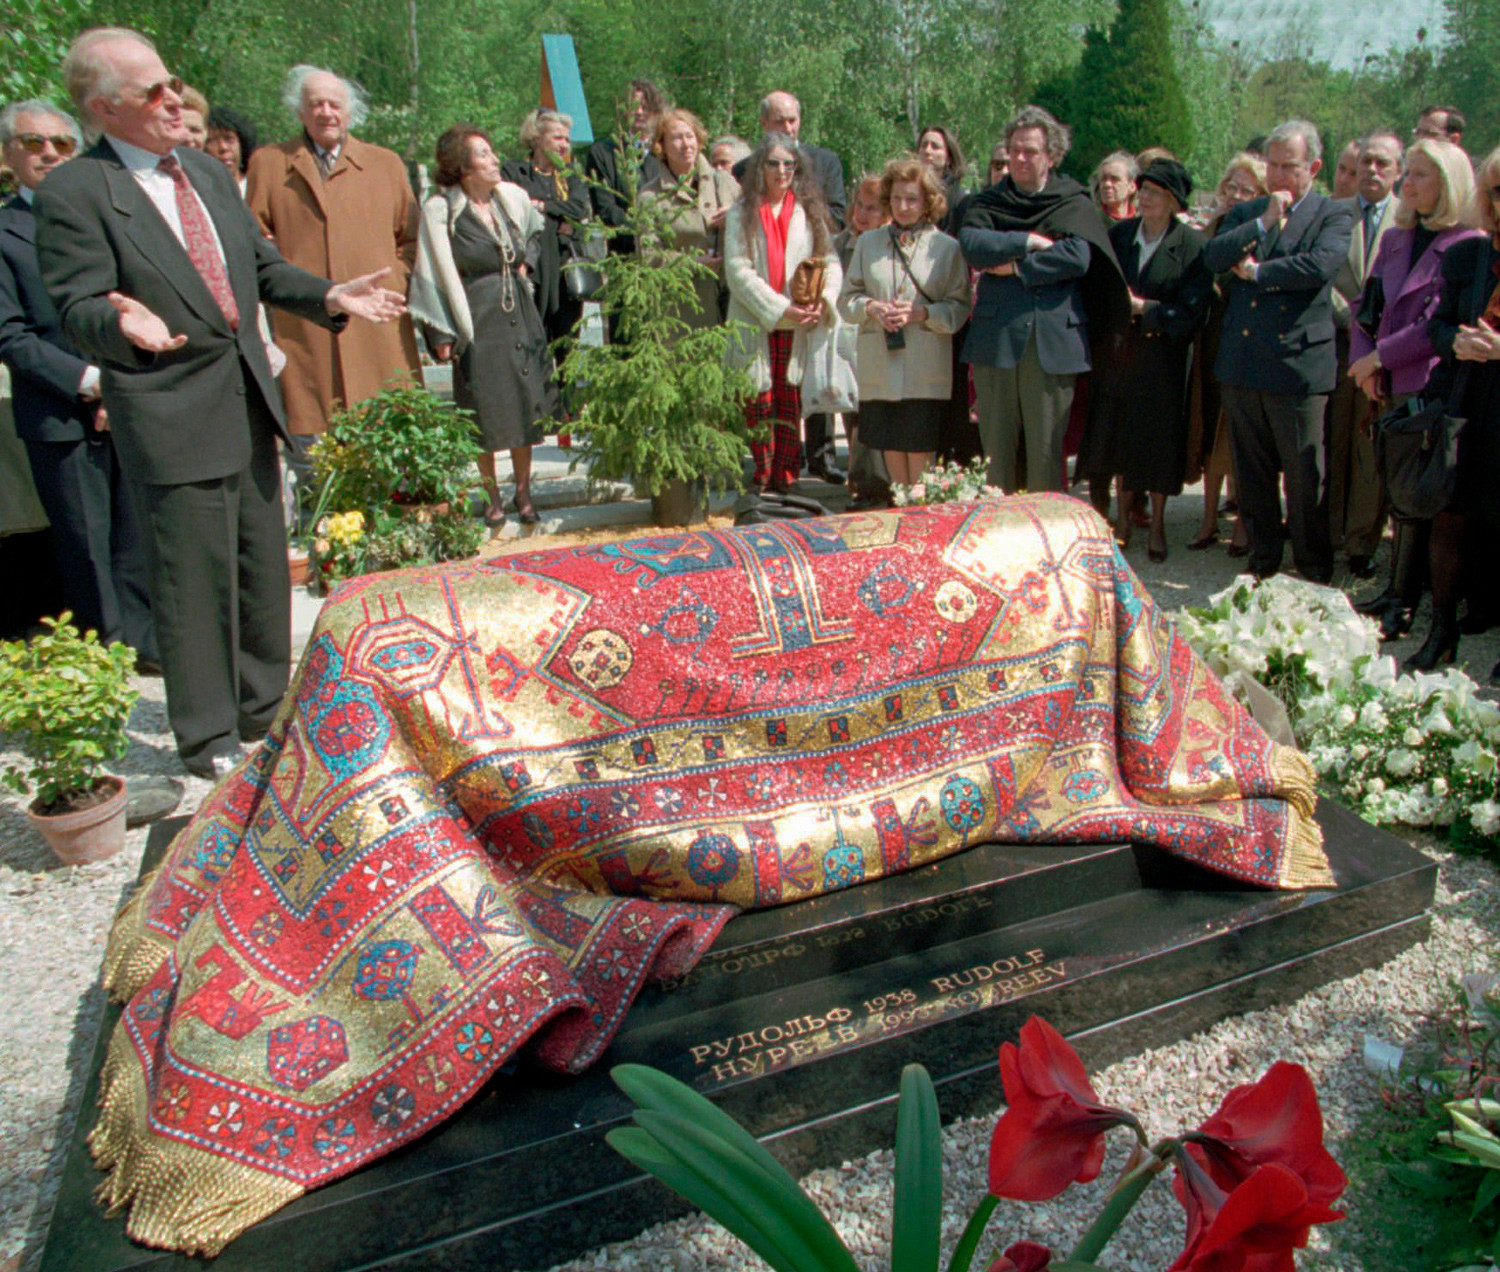 President of The Rudolf Nureyev Foundation unveils the monument decorating the grave of the dancer